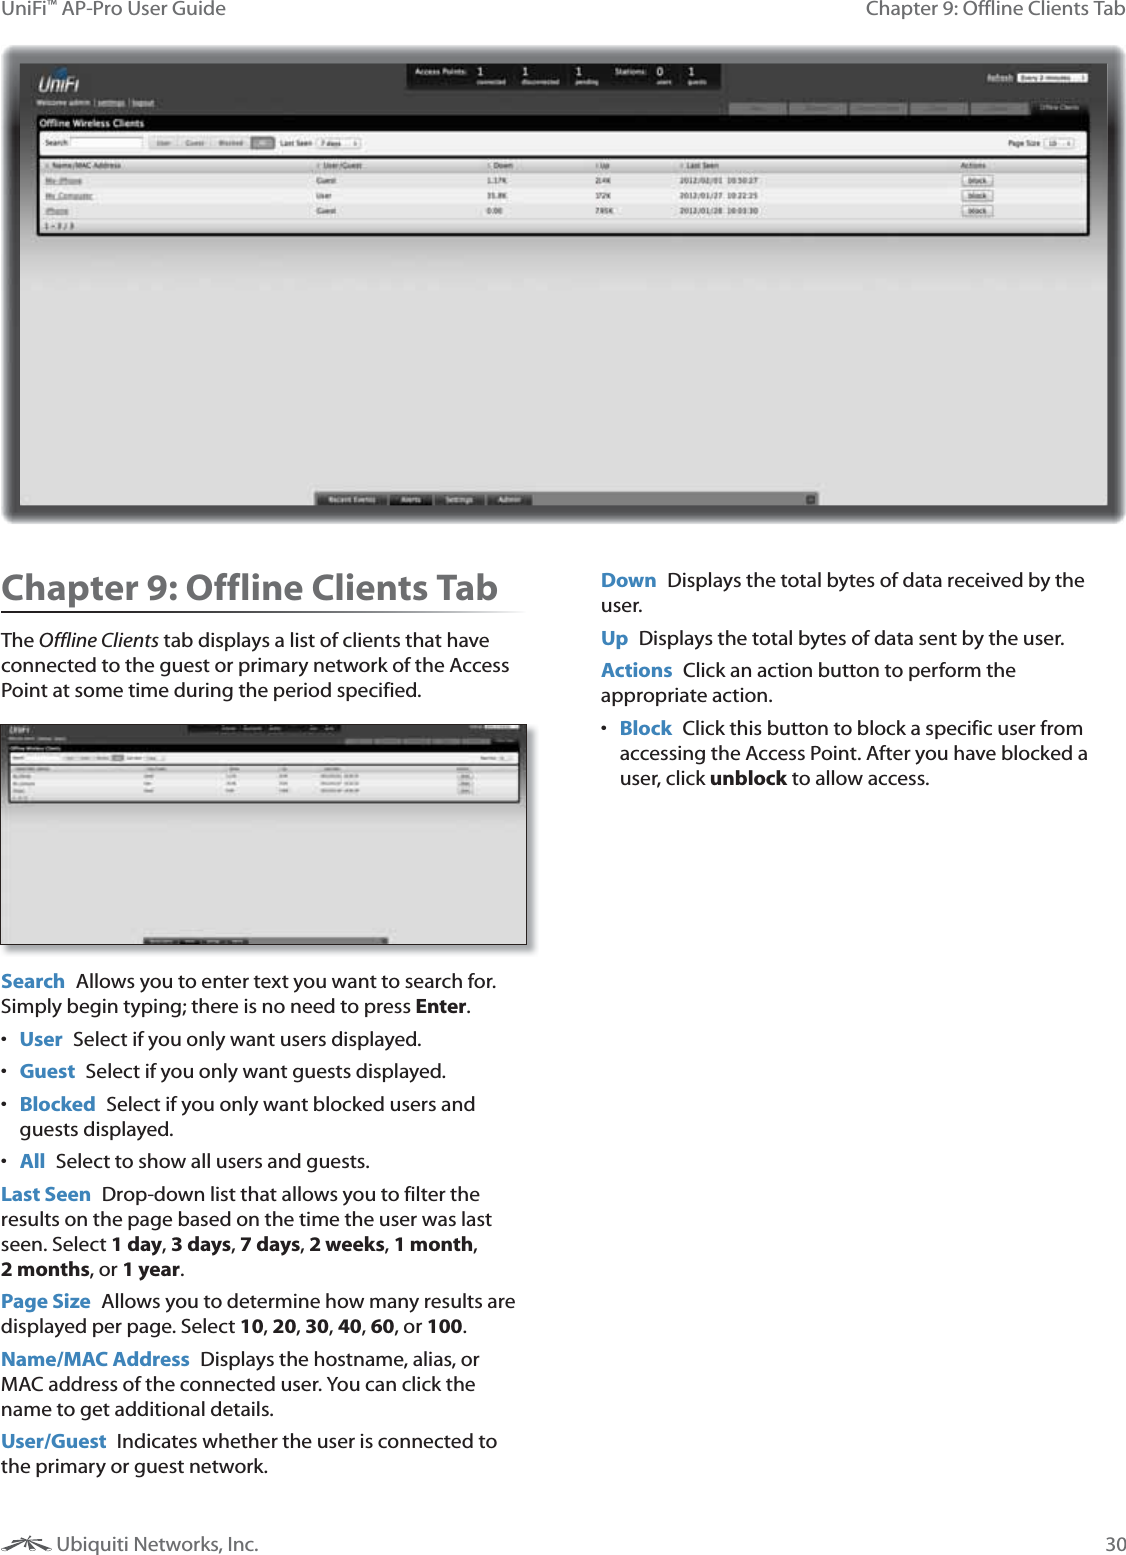 30Chapter 9: Offline Clients TabUniFi™ AP-Pro User Guide Ubiquiti Networks, Inc.Chapter 9: Offline Clients TabThe Offline Clients tab displays a list of clients that have connected to the guest or primary network of the Access Point at some time during the period specified.  Search  Allows you to enter text you want to search for. Simply begin typing; there is no need to press Enter. User Select if you only want users displayed. Guest  Select if you only want guests displayed. Blocked  Select if you only want blocked users and guests displayed. All  Select to show all users and guests.Last Seen  Drop-down list that allows you to filter the results on the page based on the time the user was last seen. Select 1 day, 3 days, 7 days, 2 weeks, 1 month, , or 1 year.Page Size  Allows you to determine how many results are displayed per page. Select 10, 20, 30, 40, 60, or 100. Name/MAC Address  Displays the hostname, alias, or MAC address of the connected user. You can click the name to get additional details.User/Guest  Indicates whether the user is connected to the primary or guest network.Down  Displays the total bytes of data received by the user.Up  Displays the total bytes of data sent by the user.Actions  Click an action button to perform the appropriate action.  Block  Click this button to block a specific user from accessing the Access Point. After you have blocked a user, click unblock to allow access.